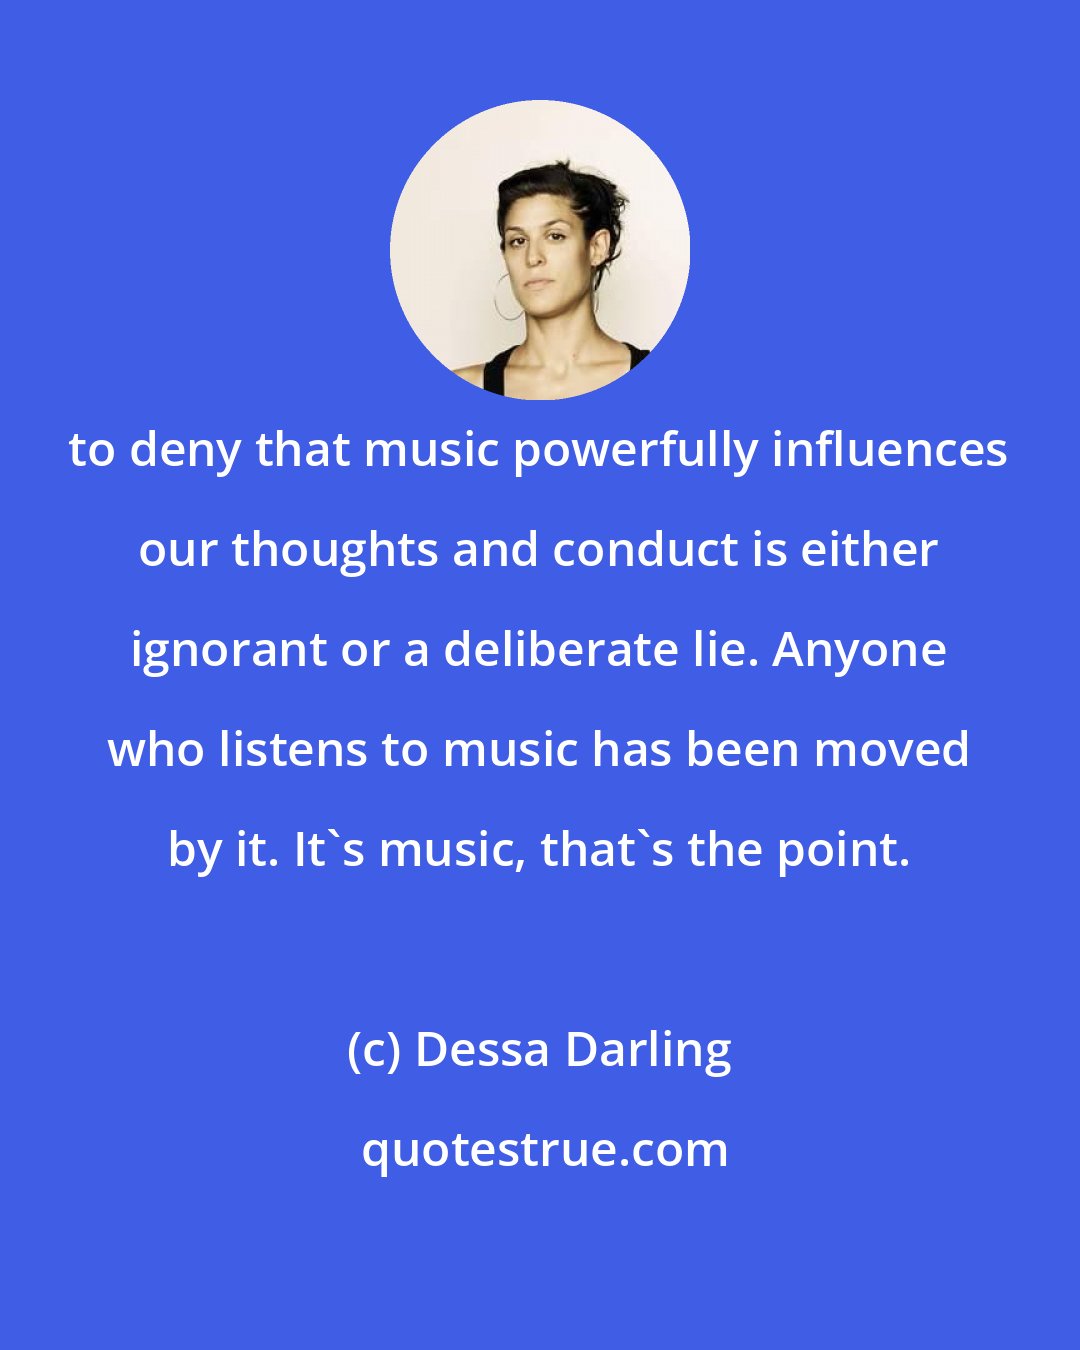 Dessa Darling: to deny that music powerfully influences our thoughts and conduct is either ignorant or a deliberate lie. Anyone who listens to music has been moved by it. It's music, that's the point.